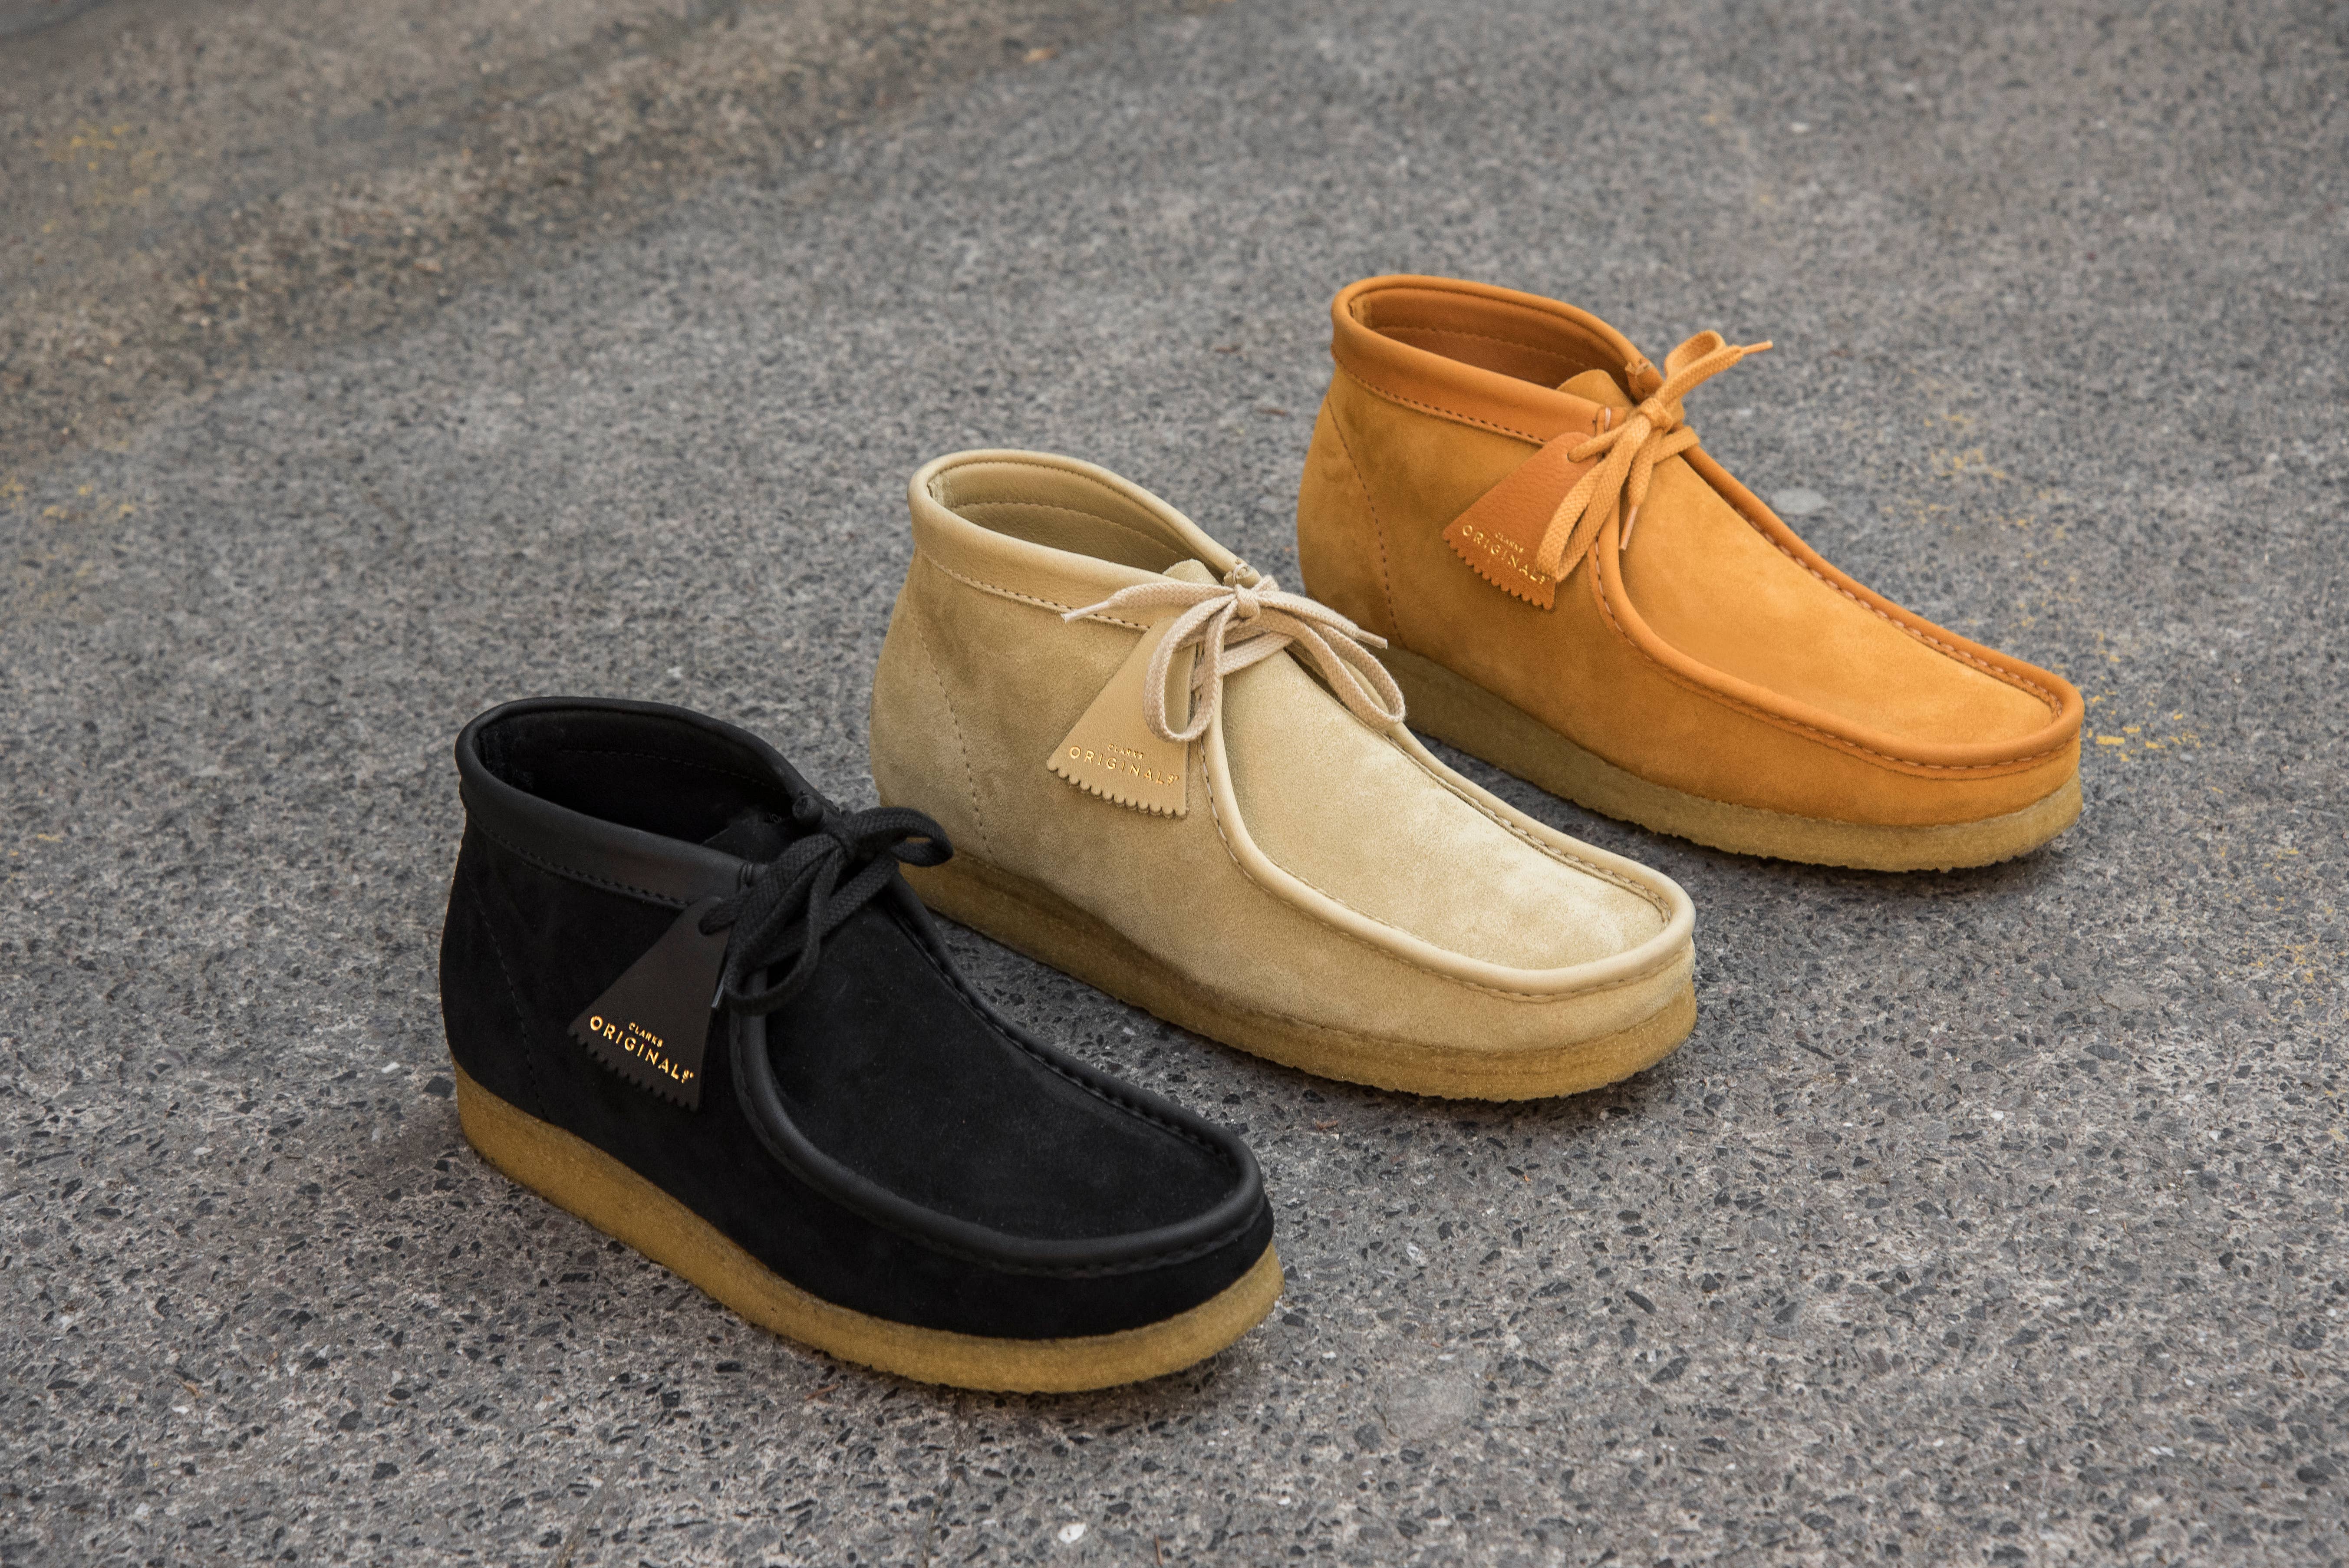 Clarks Originals Wrap the Wallabee in Luxury with the Made in Italy Pack |